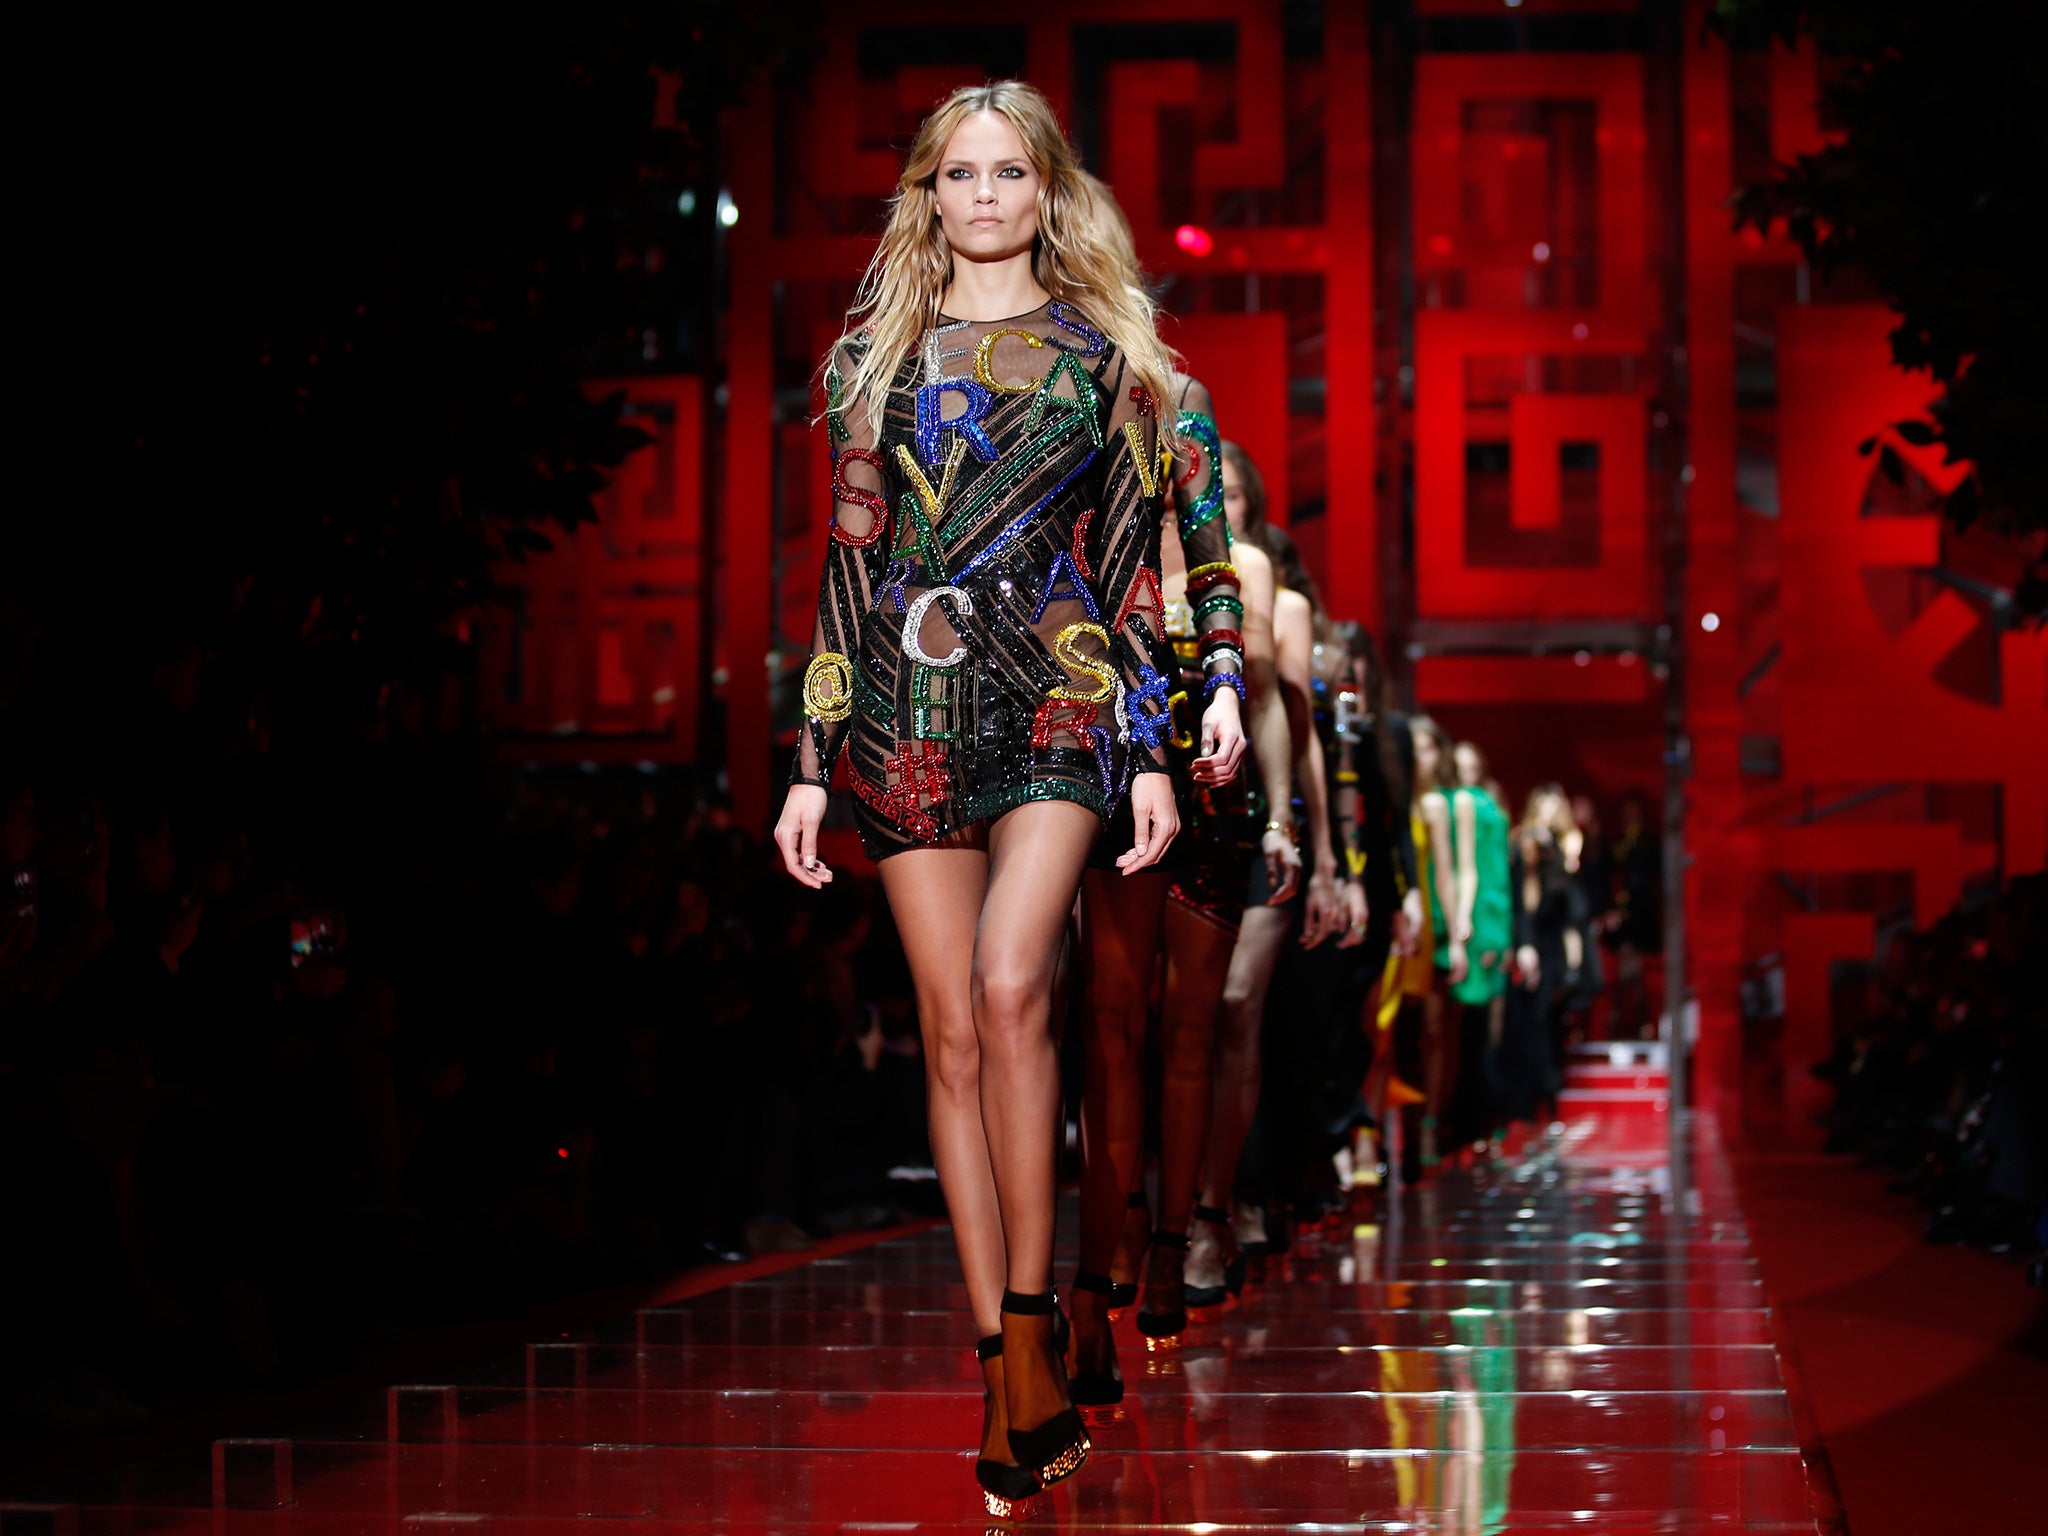 The Versace collection is all about a ‘new woman’, said Donatella Versace at Milan Fashion Week